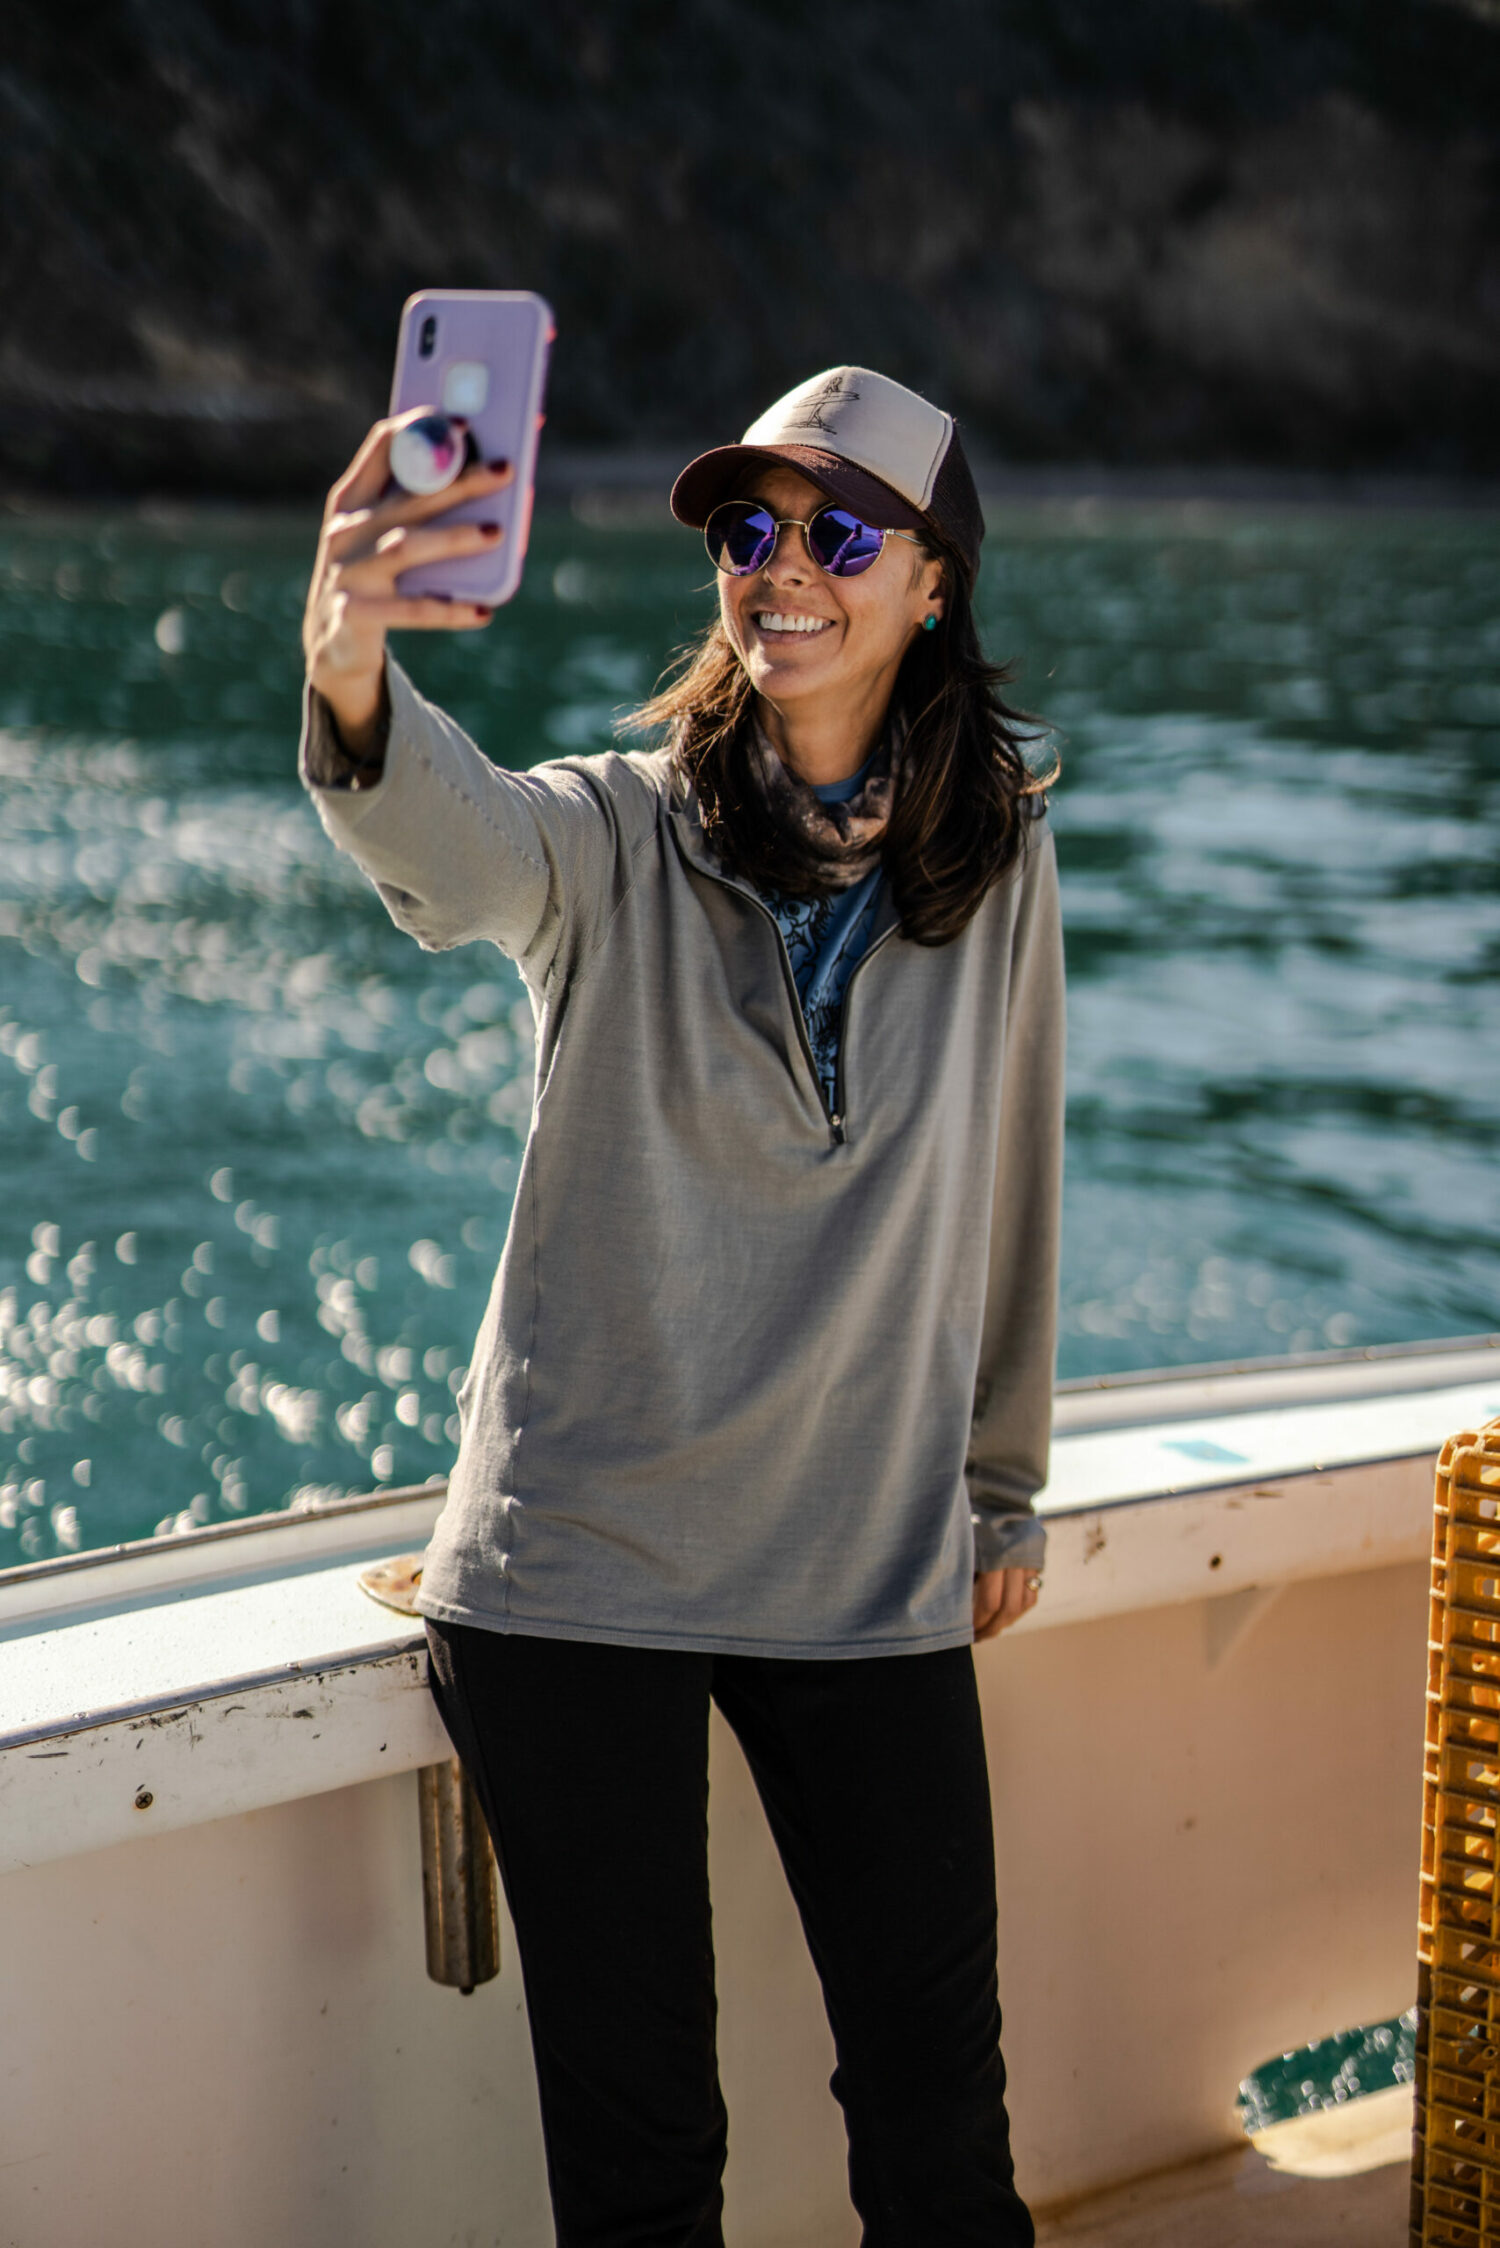 Writer and partner of a commercial fisherman Megan Waldrep taking a selfie on a fishing boat